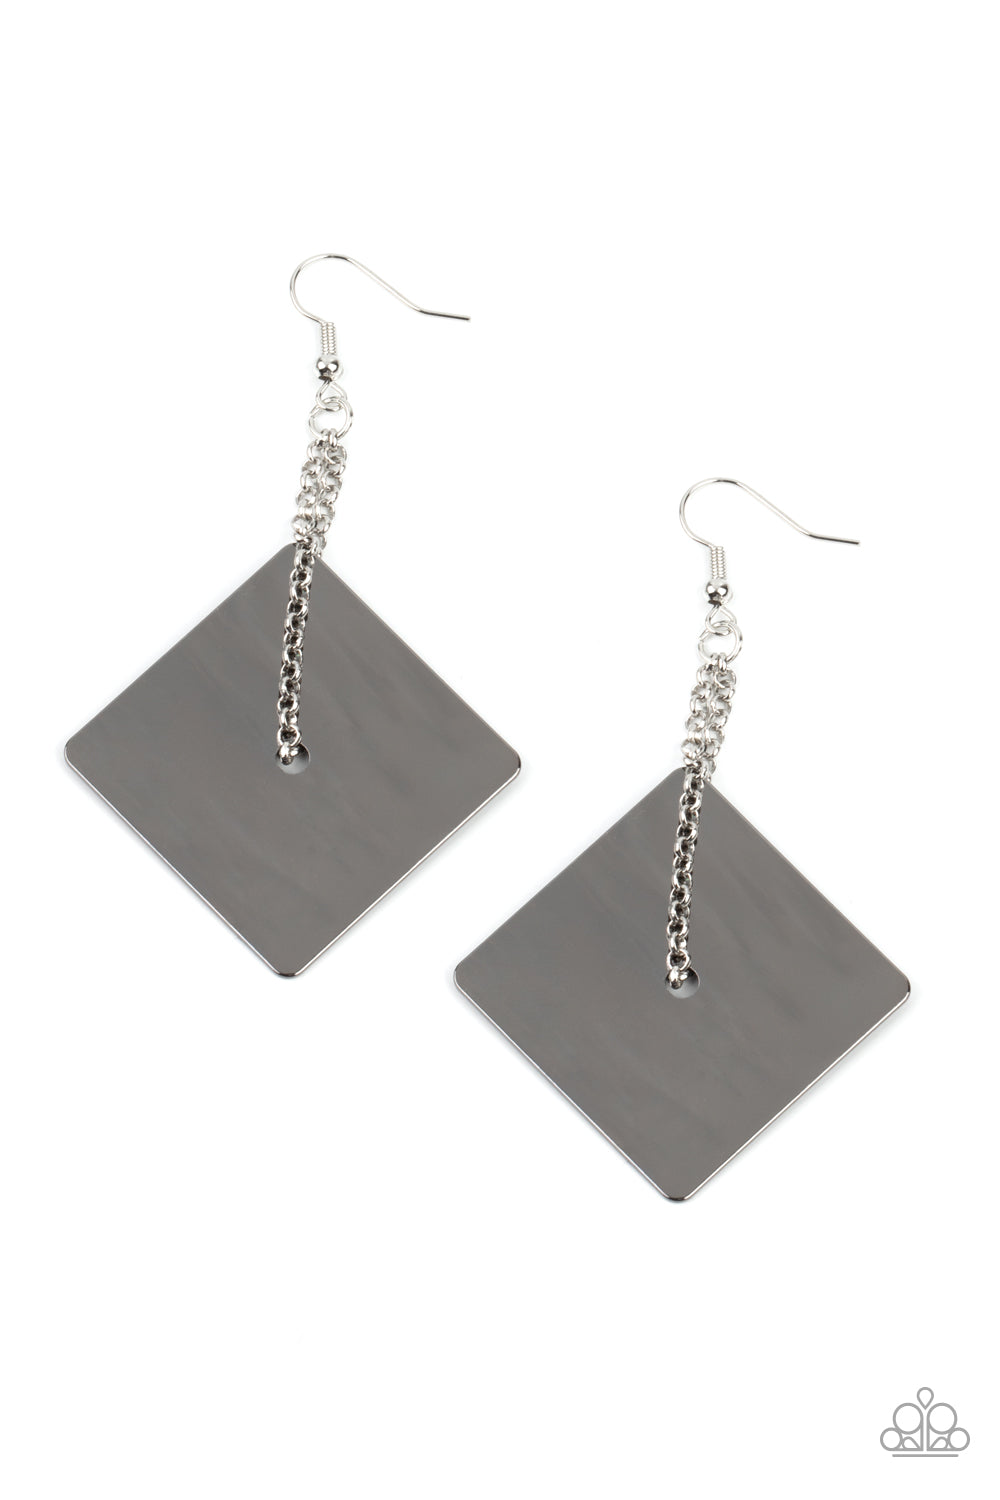 Block Party Posh Black Earring - Paparazzi Accessories  A dainty silver chain is threaded through the center of a flat square gunmetal frame, looping into an edgy lure. Earring attaches to a standard fishhook fitting.  Sold as one pair of earrings.